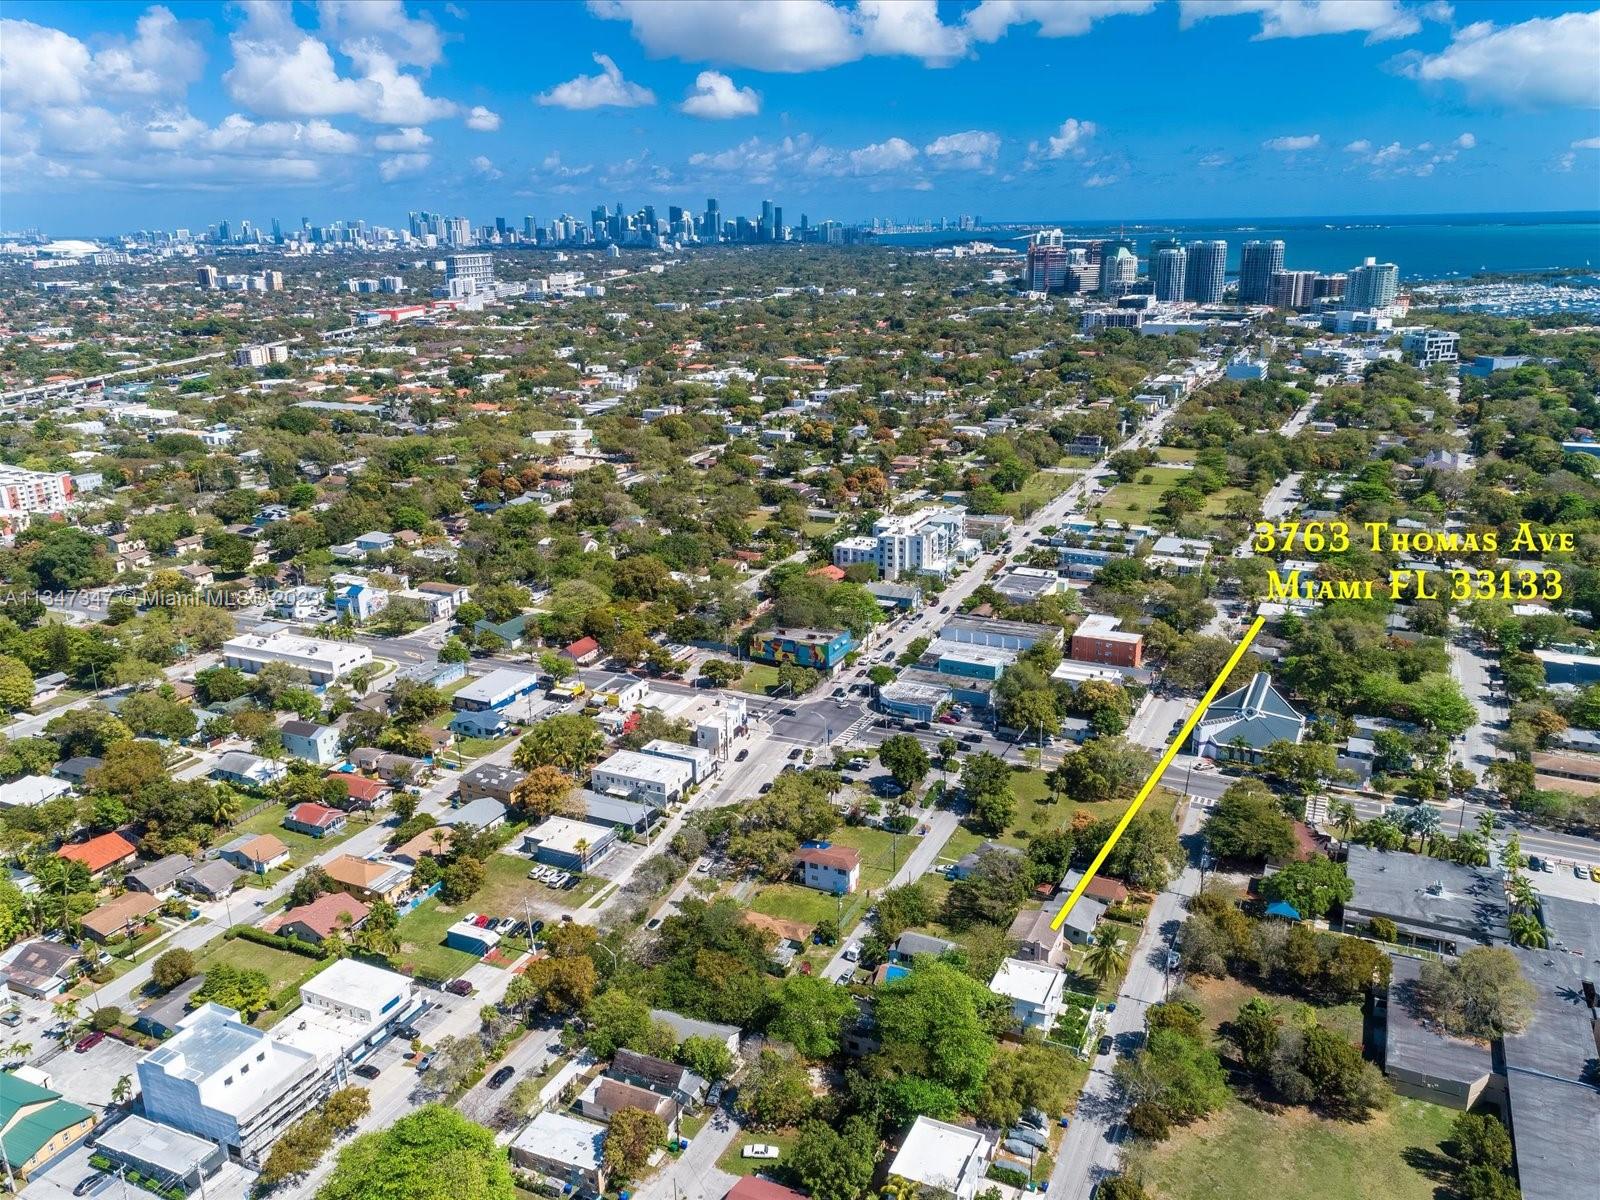 **Back On The Market** LOCATION, LOCATION, LOCATION! A builder's dream of 4,200 sqft of prime real estate in Coconut Grove! A multitude of opportunities to make your own. A demolish away from the best located lot to build your dream home or do a complete remodel to a custom built home. Existing property does have fire damage, new roof in 2015, all hurricane impact windows. Minutes from Cocowalk, Biscayne Bay, Dadeland, Brickell & Downtown. You don't want to miss this!